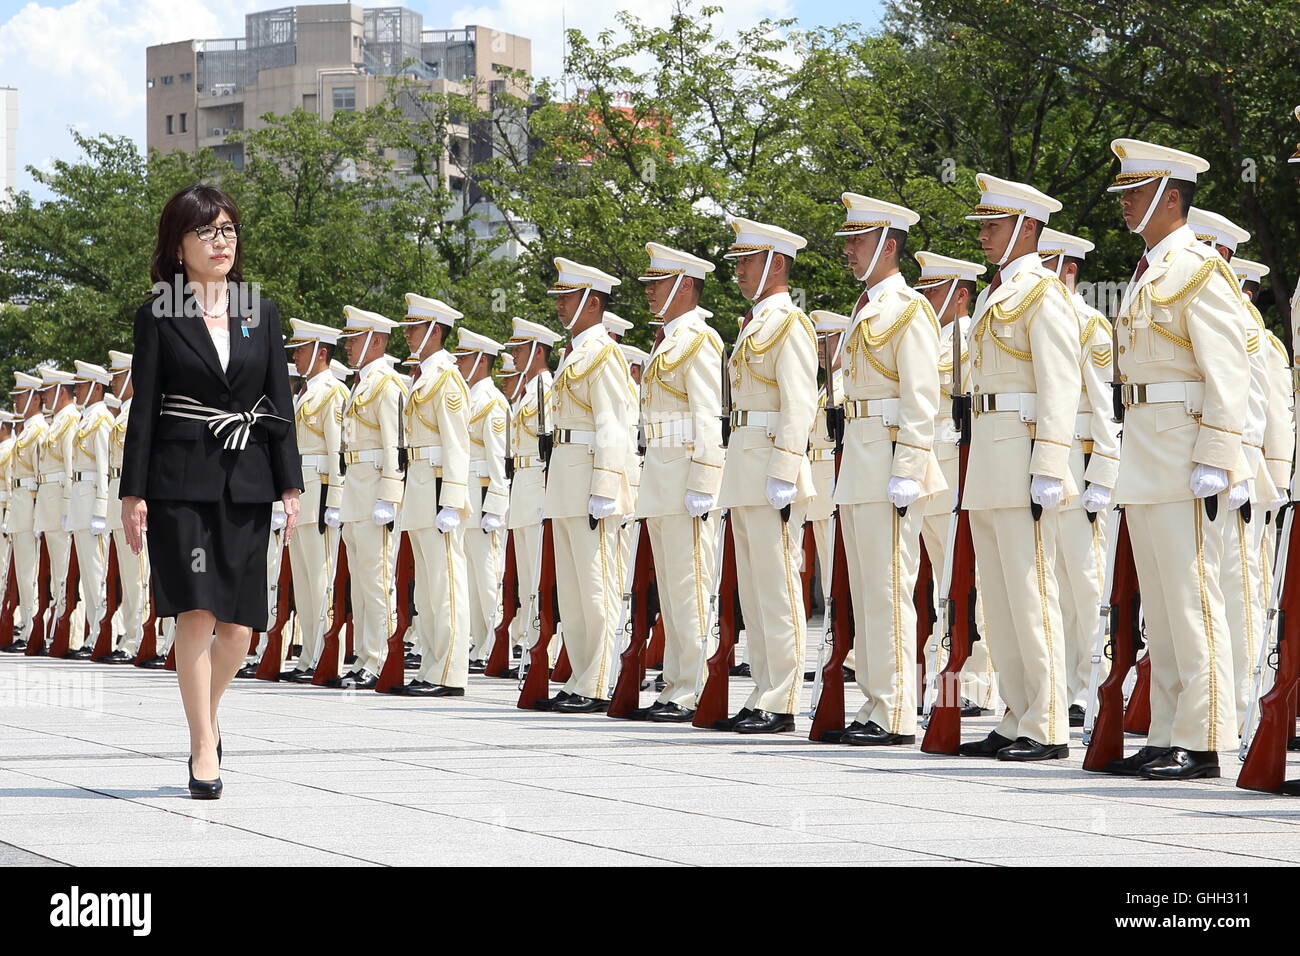 Newly appointed defense minister of Japan, Tomomi Inada reviews a guard of honor during a welcoming ceremony at the Ministry of Defense in Tokyo Japan on 04 Aug 2016. © Motoo Naka/AFLO/Alamy Live News Stock Photo